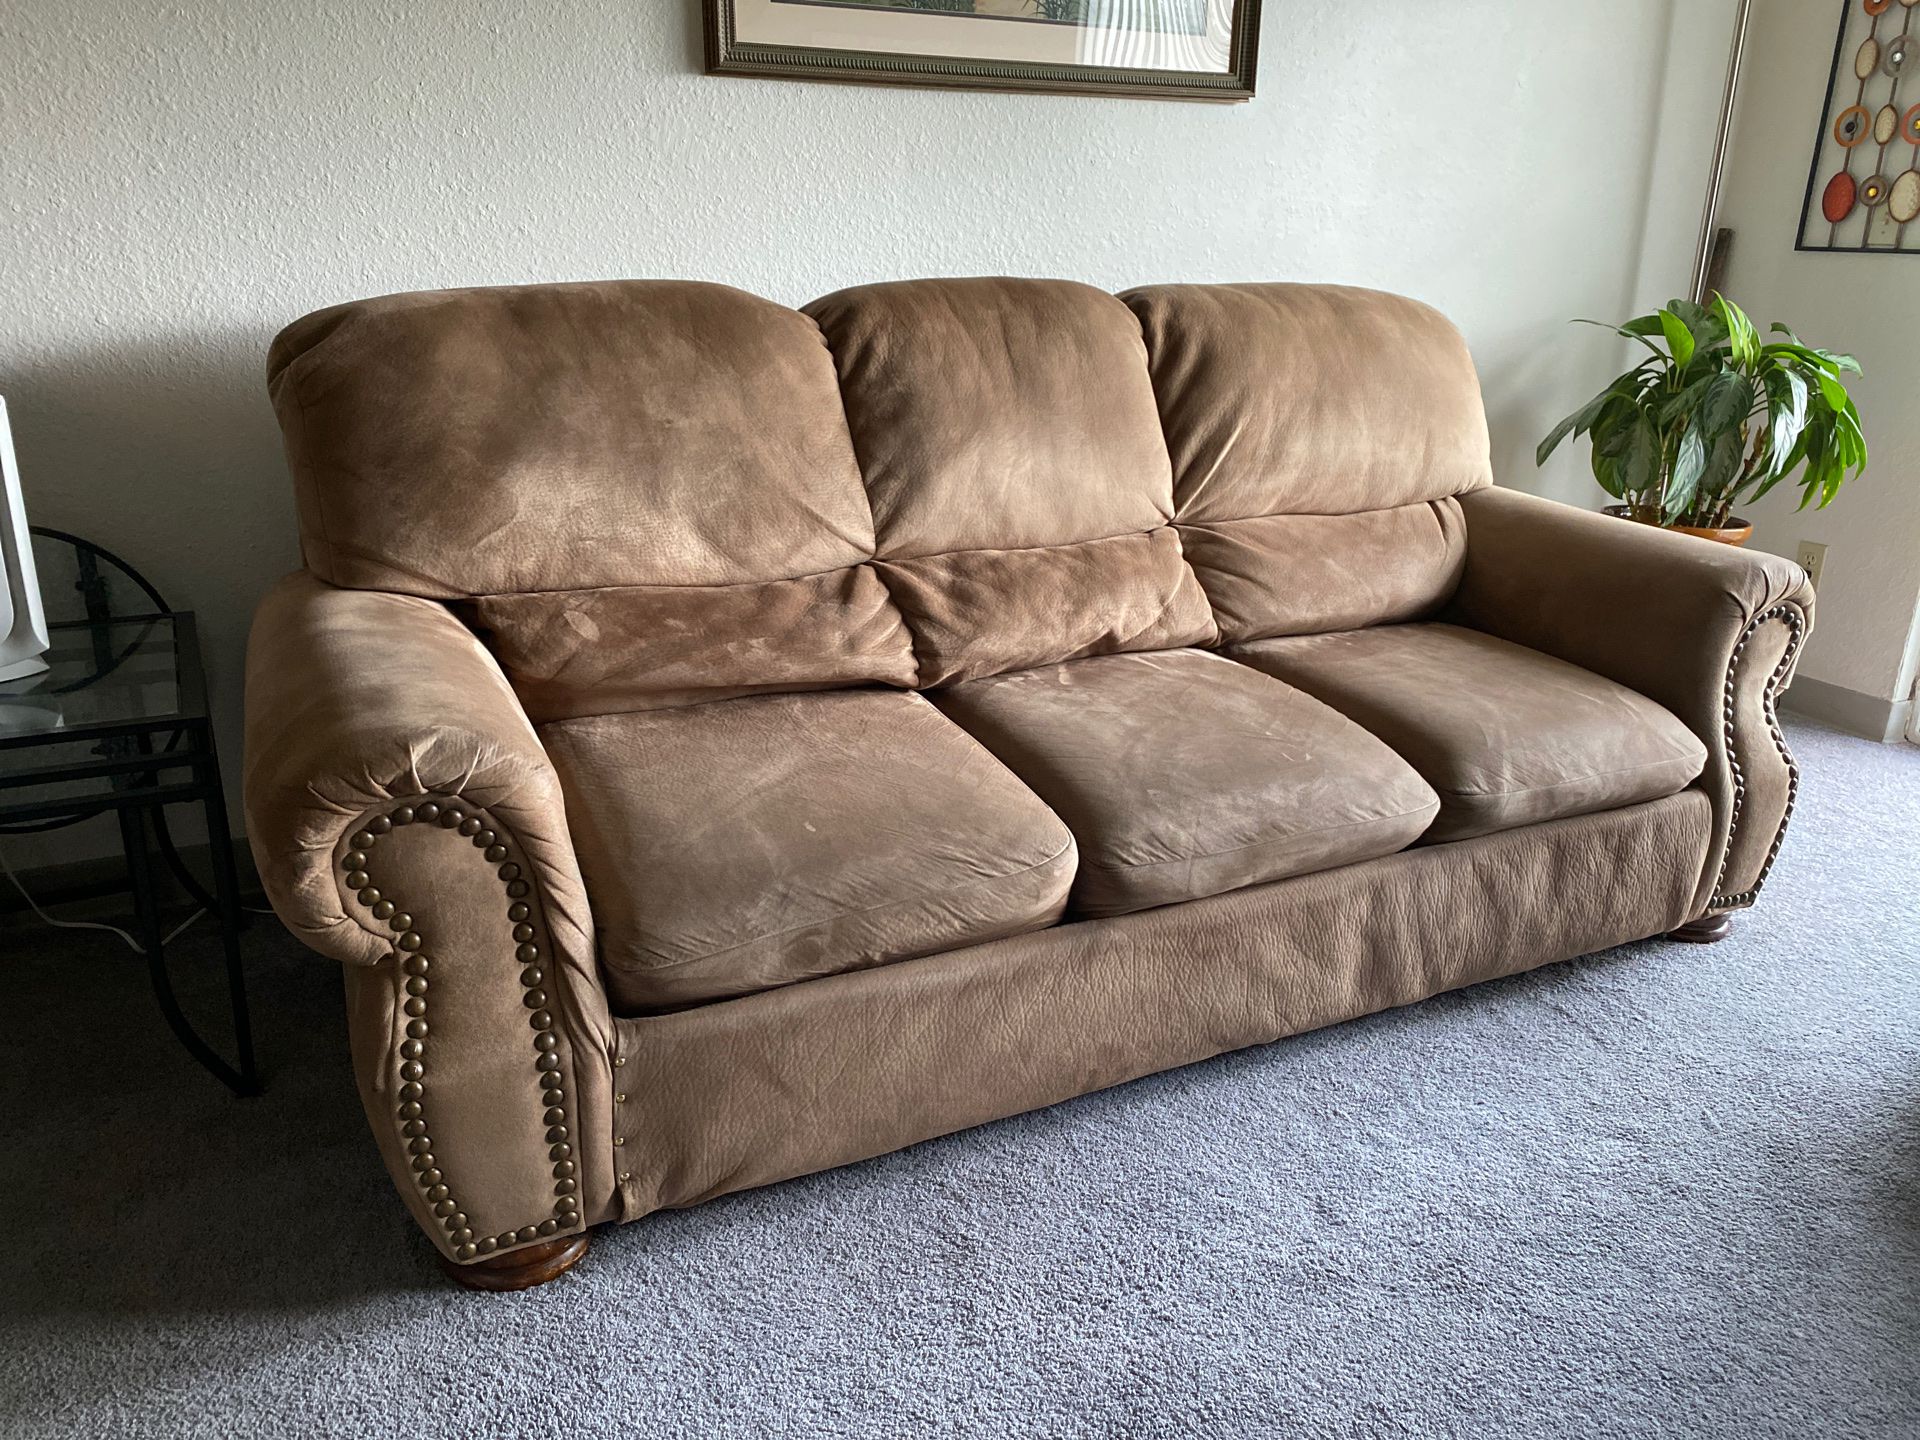 FREE Set of Couches in Federal Way